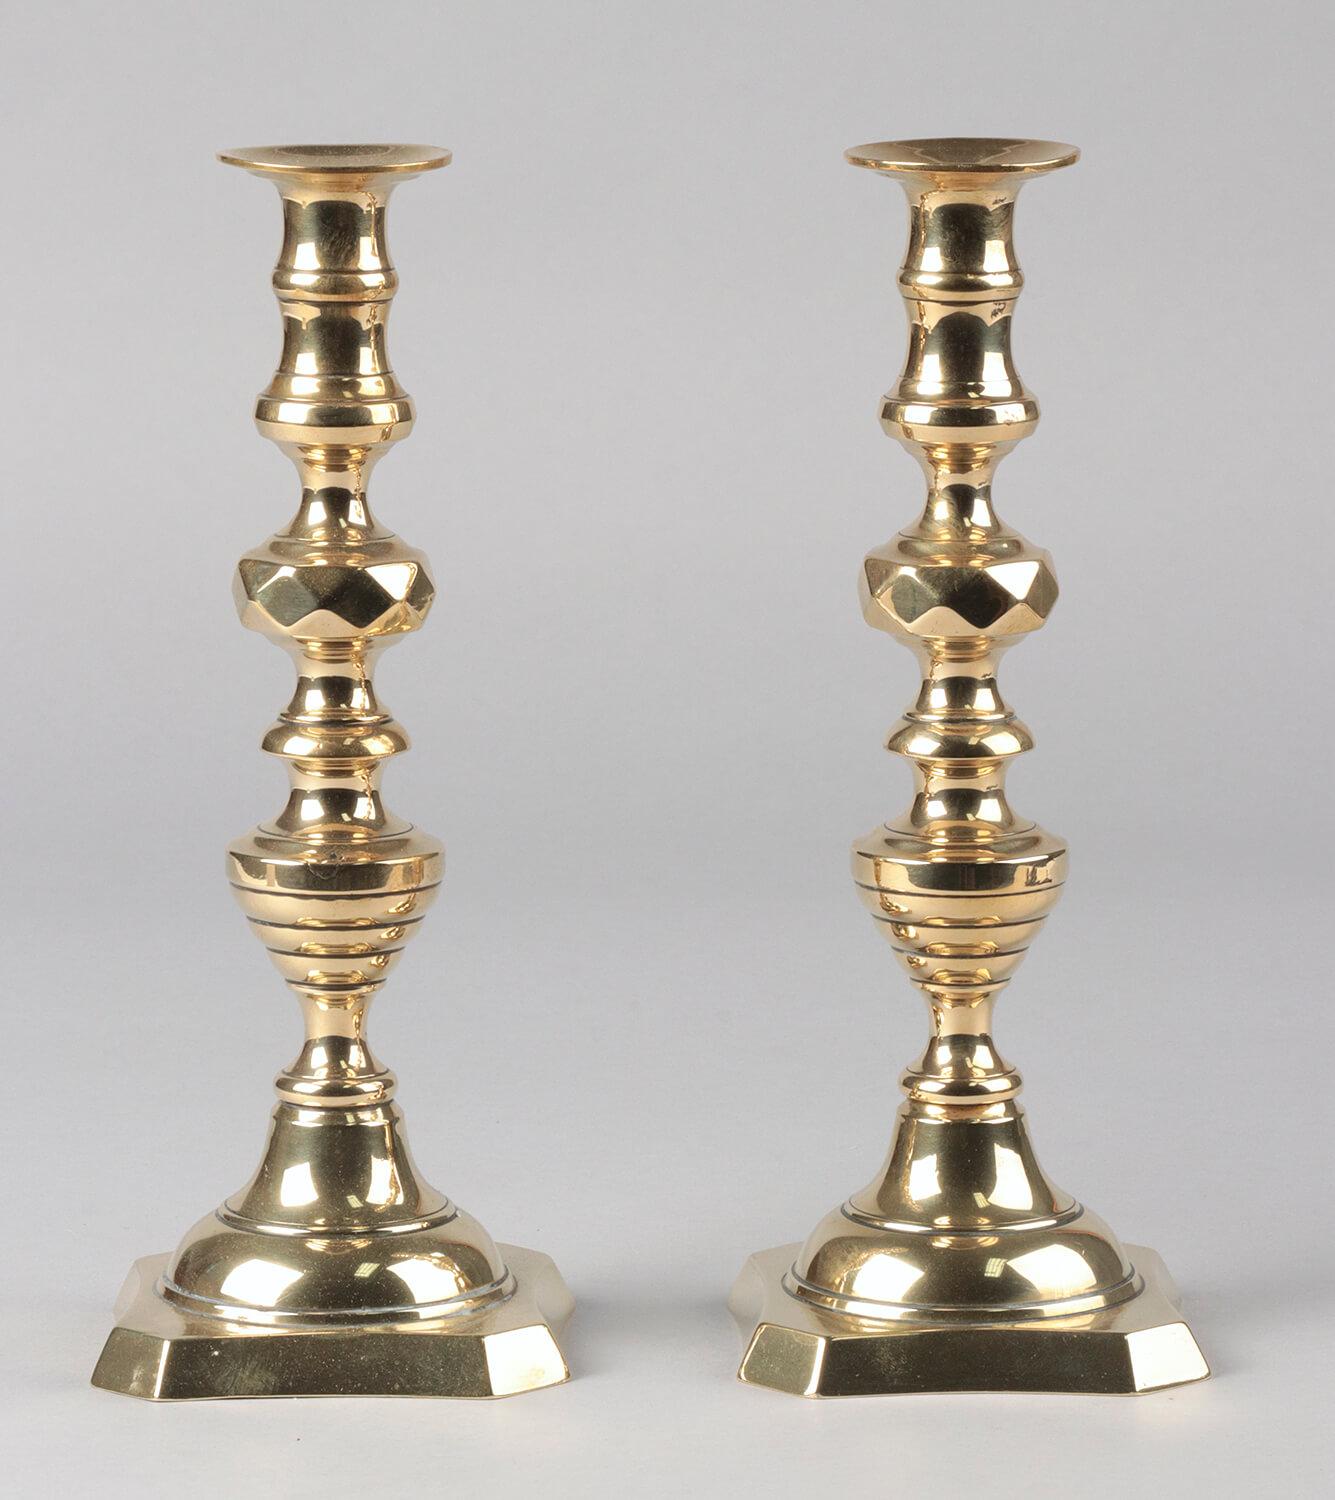 A beautiful set of 2 antique candlesticks from the Victorian era. The candlesticks have a beautiful design, with many geometric shapes composed.